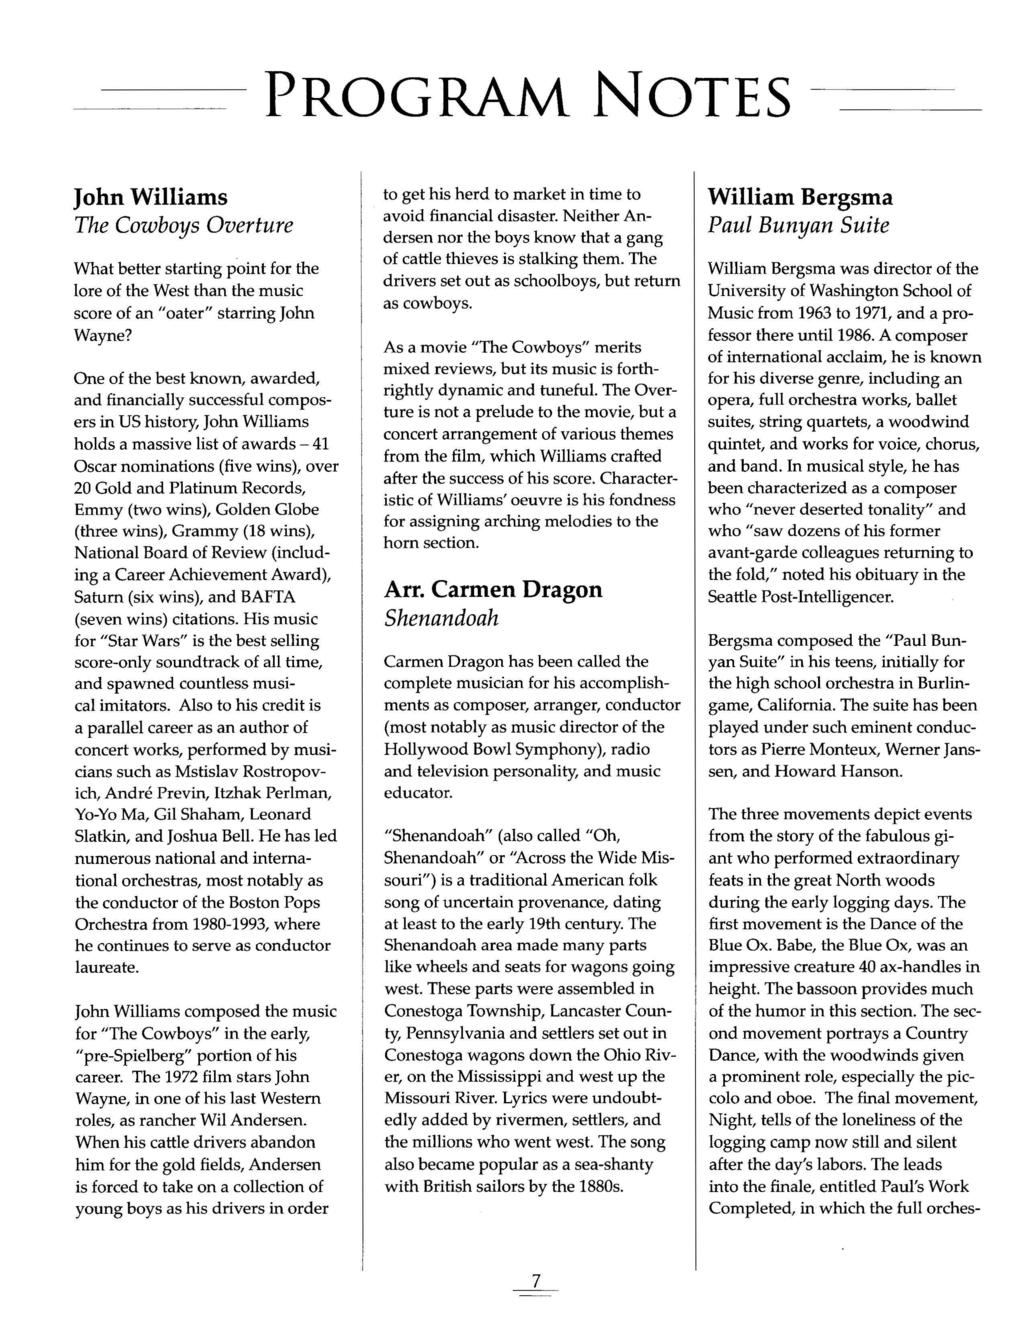 PROGRAM NOTES John Williams The Cowboys Overture What better starting point for the lore of the West than the music score of an "oater" starring John Wayne?